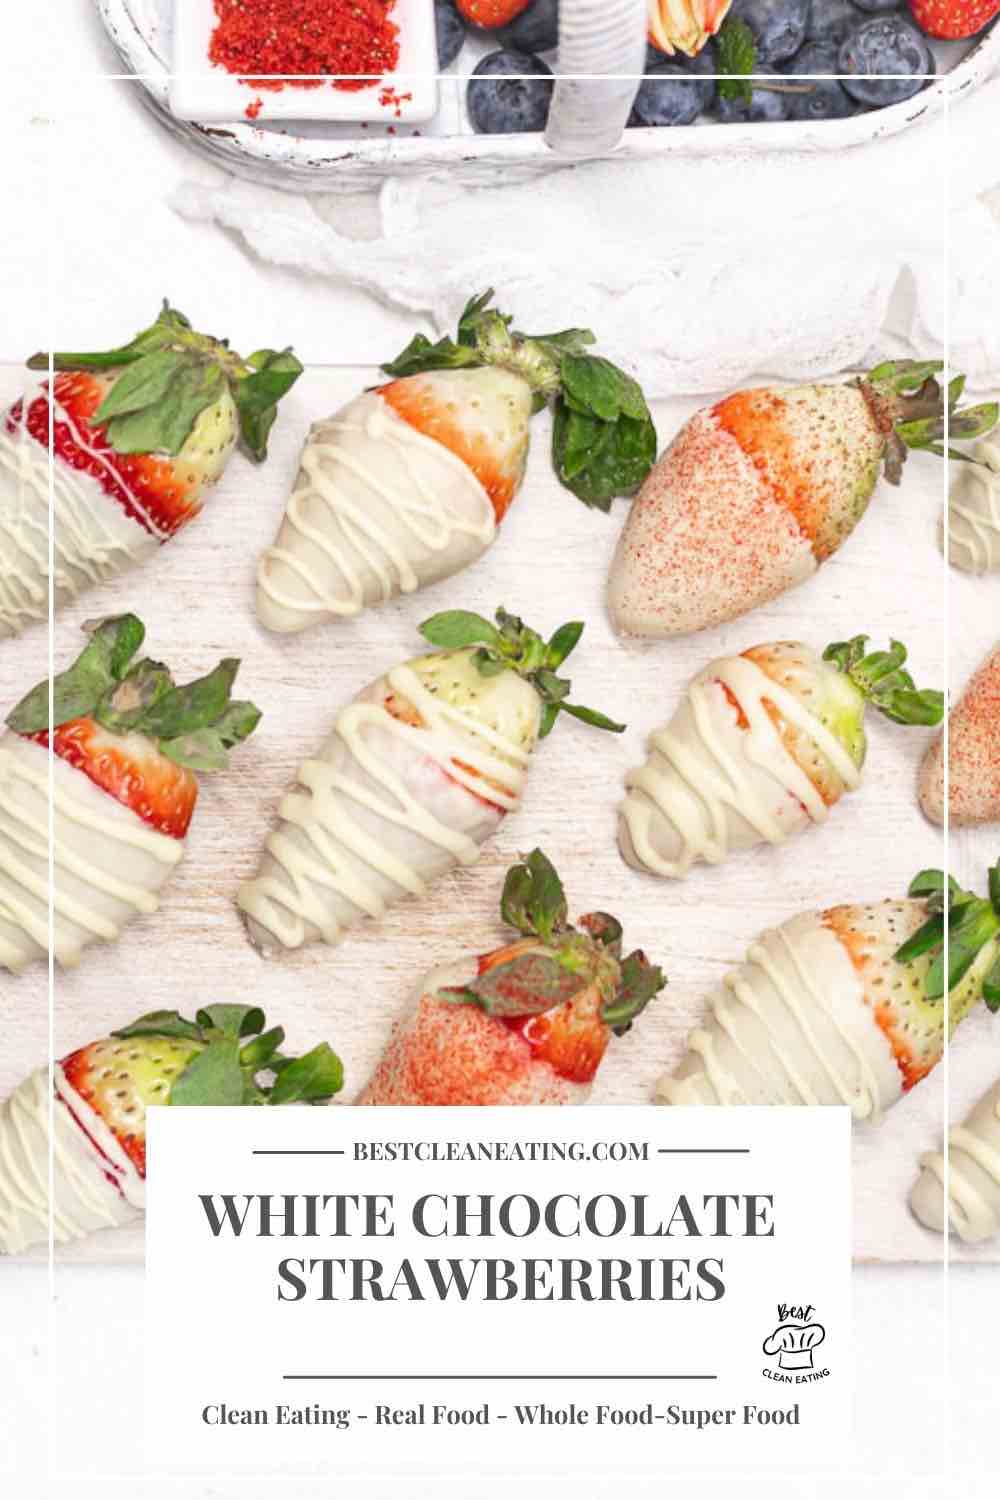 Strawberries Covered In White Chocolate on a wooden board.